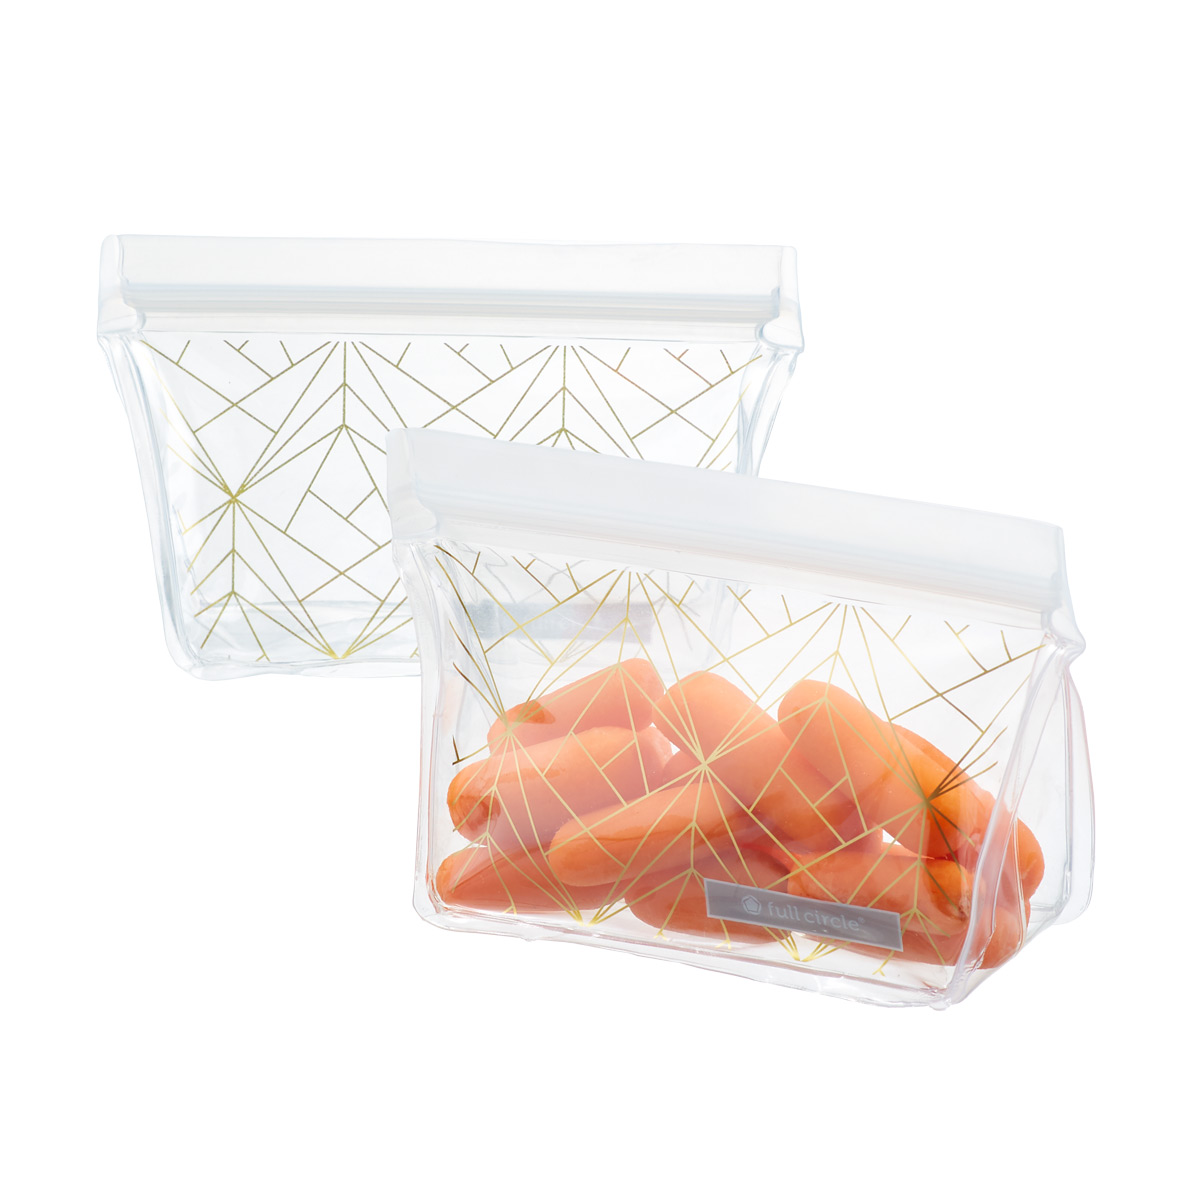 https://www.containerstore.com/catalogimages/475252/10075724-reusable-snack-bags-gold-ge.jpg